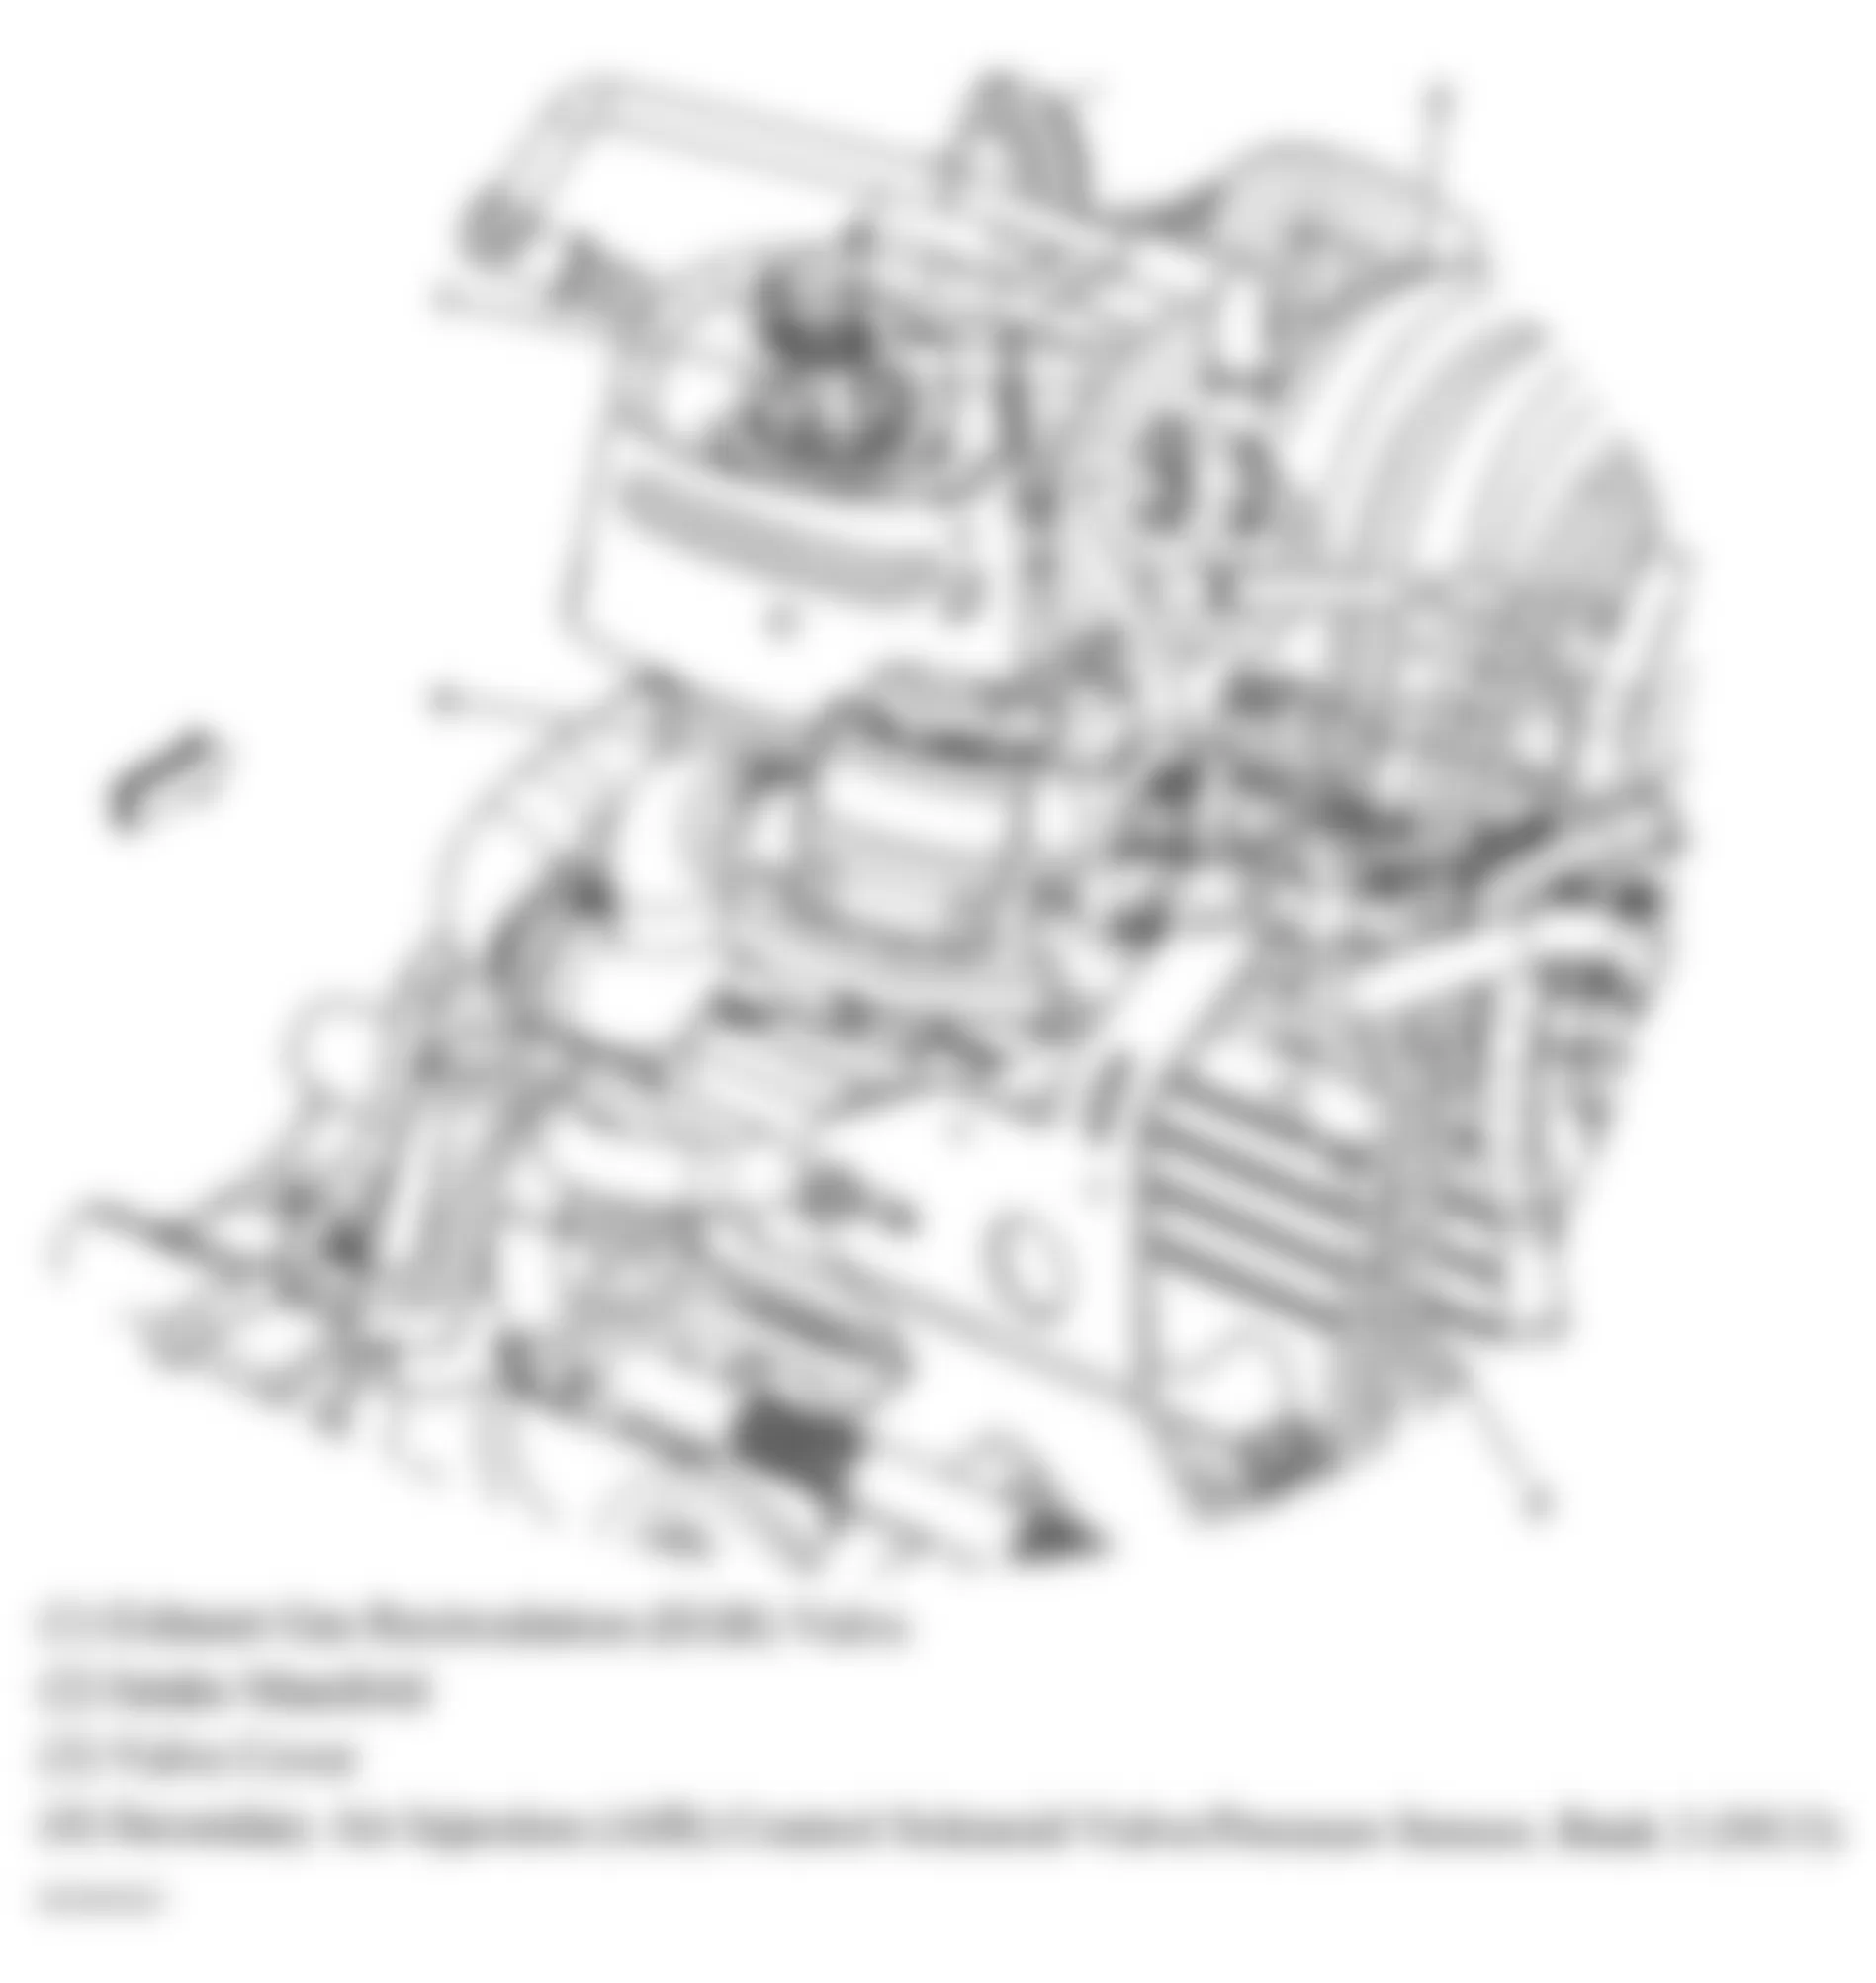 Buick Allure CXS 2006 - Component Locations -  Upper Rear Of Engine (3.8L)